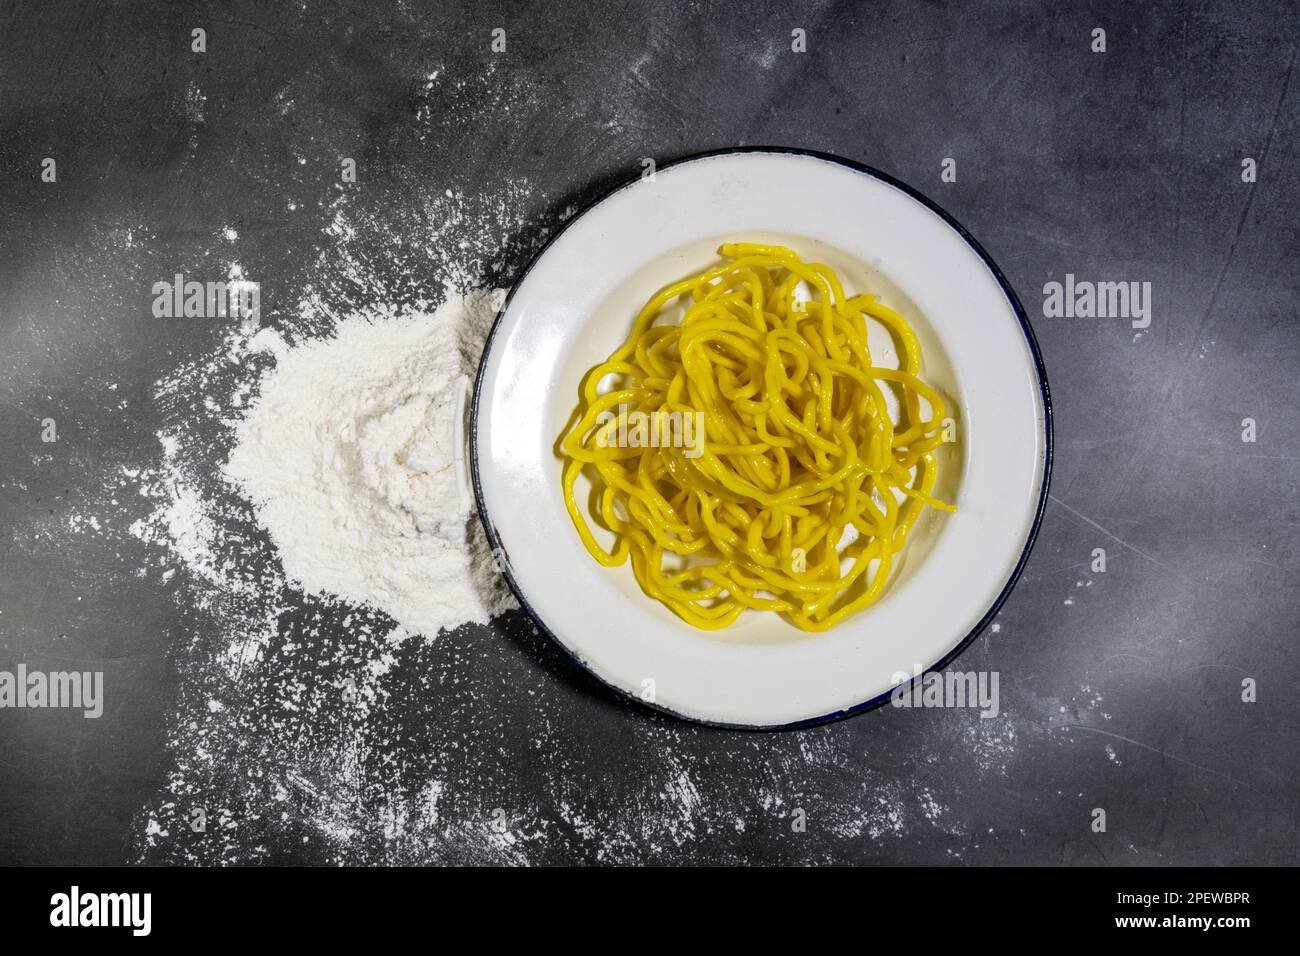 Top view of yellow noodles in a white plate and all purpose flour, on the dark background. Stock Photo